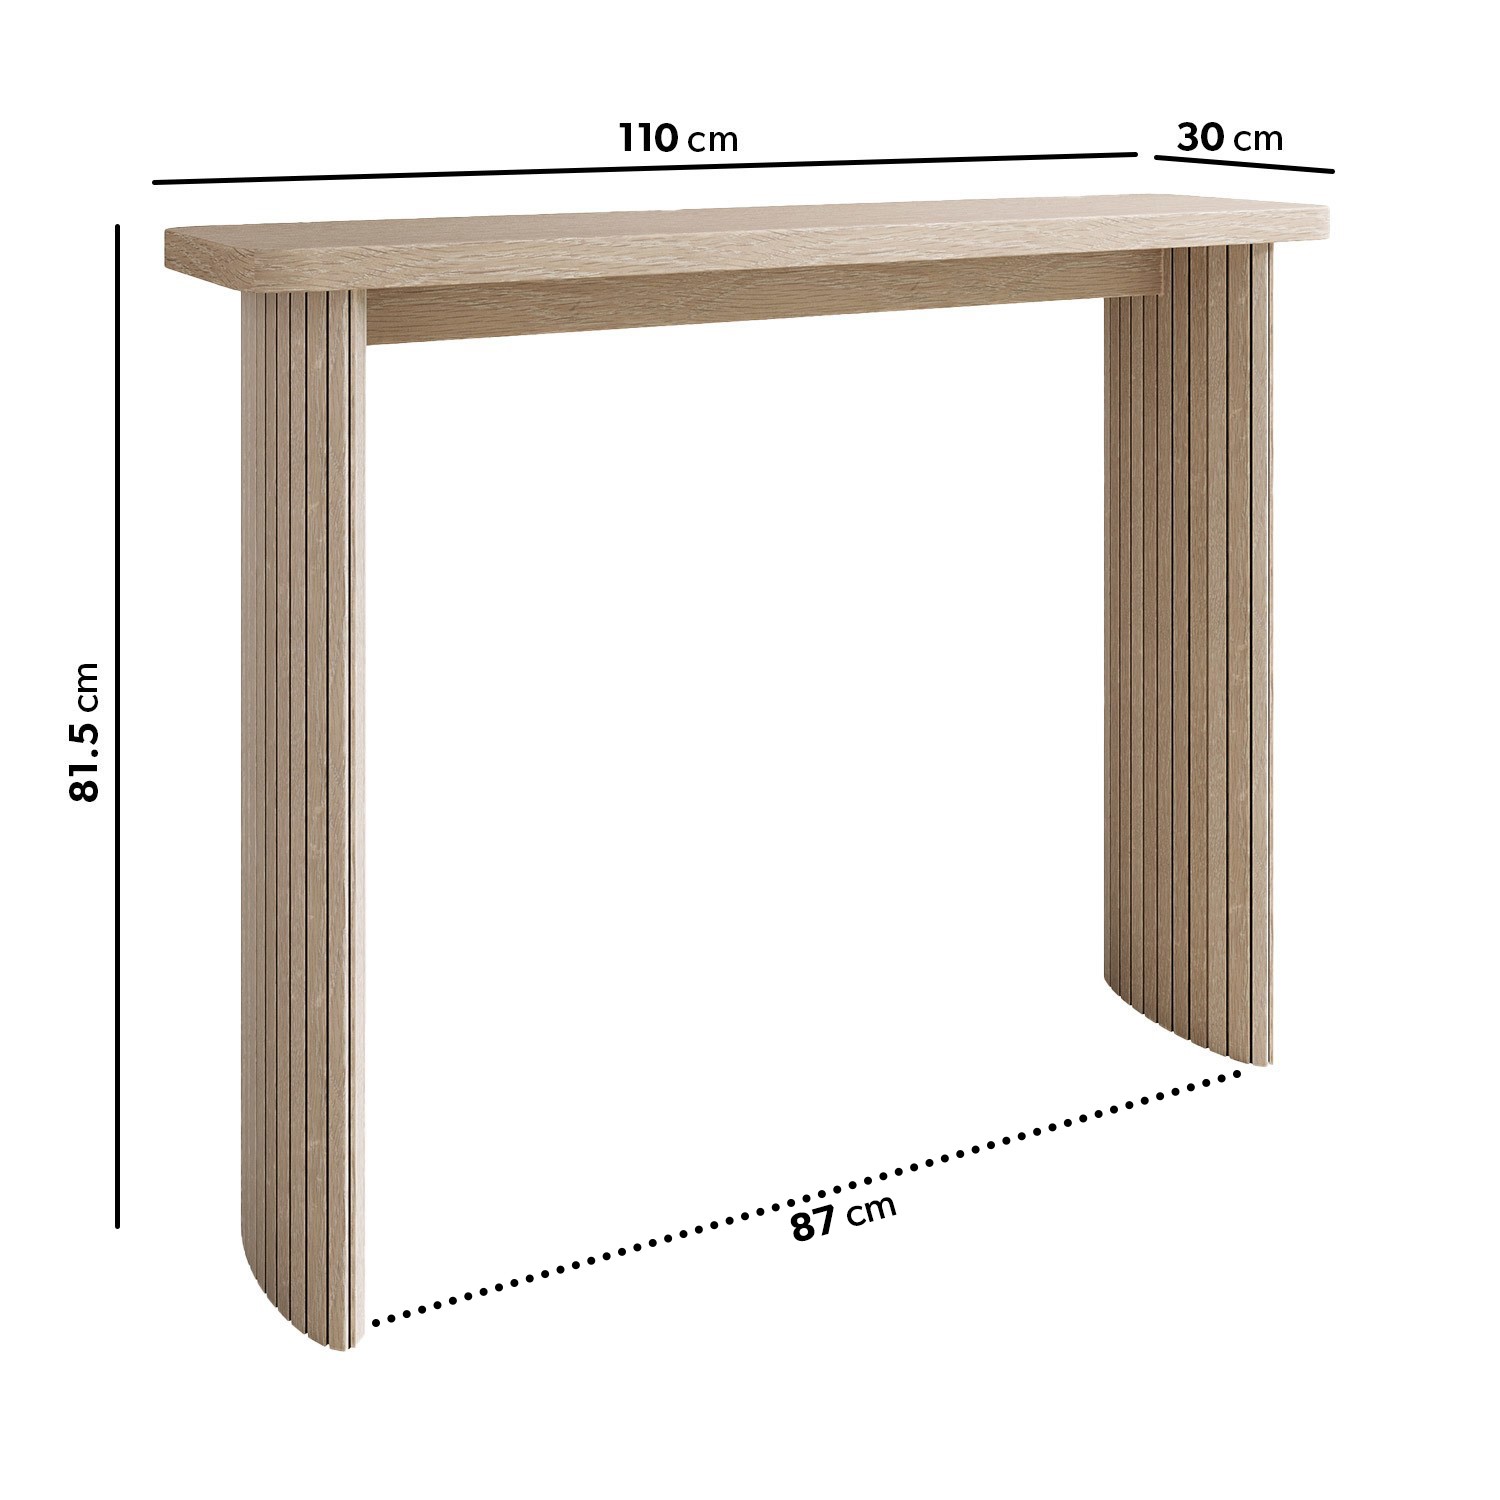 Read more about Narrow light oak console table jarel